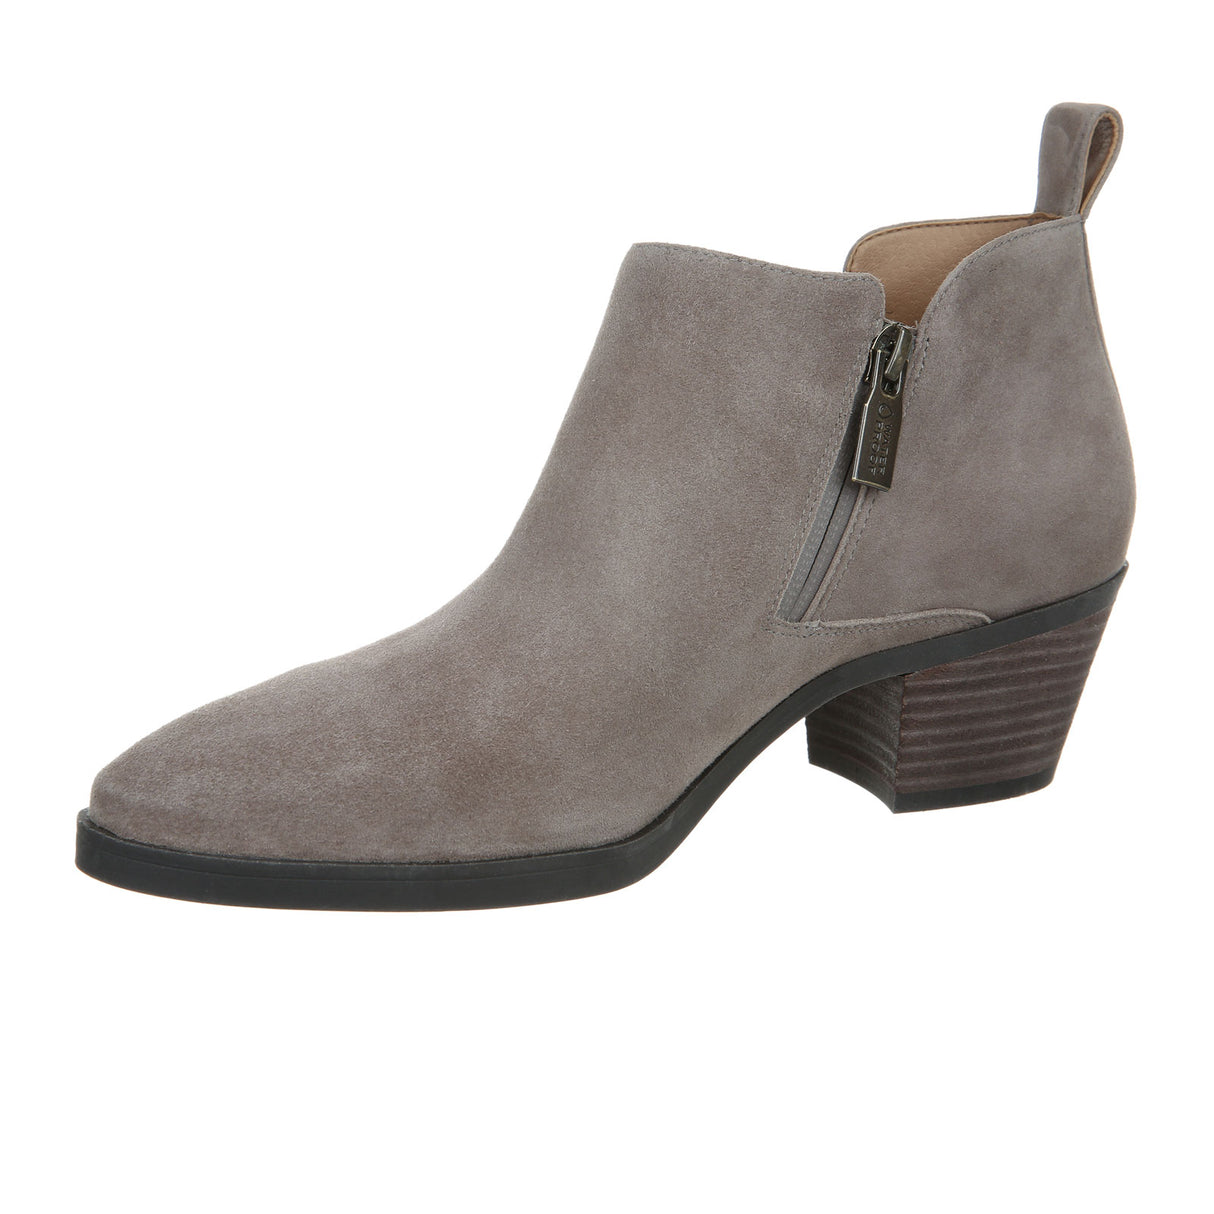 Vionic Cecily Ankle Boot (Women) - Stone Waterproof Suede Boots - Fashion - Ankle Boot - The Heel Shoe Fitters